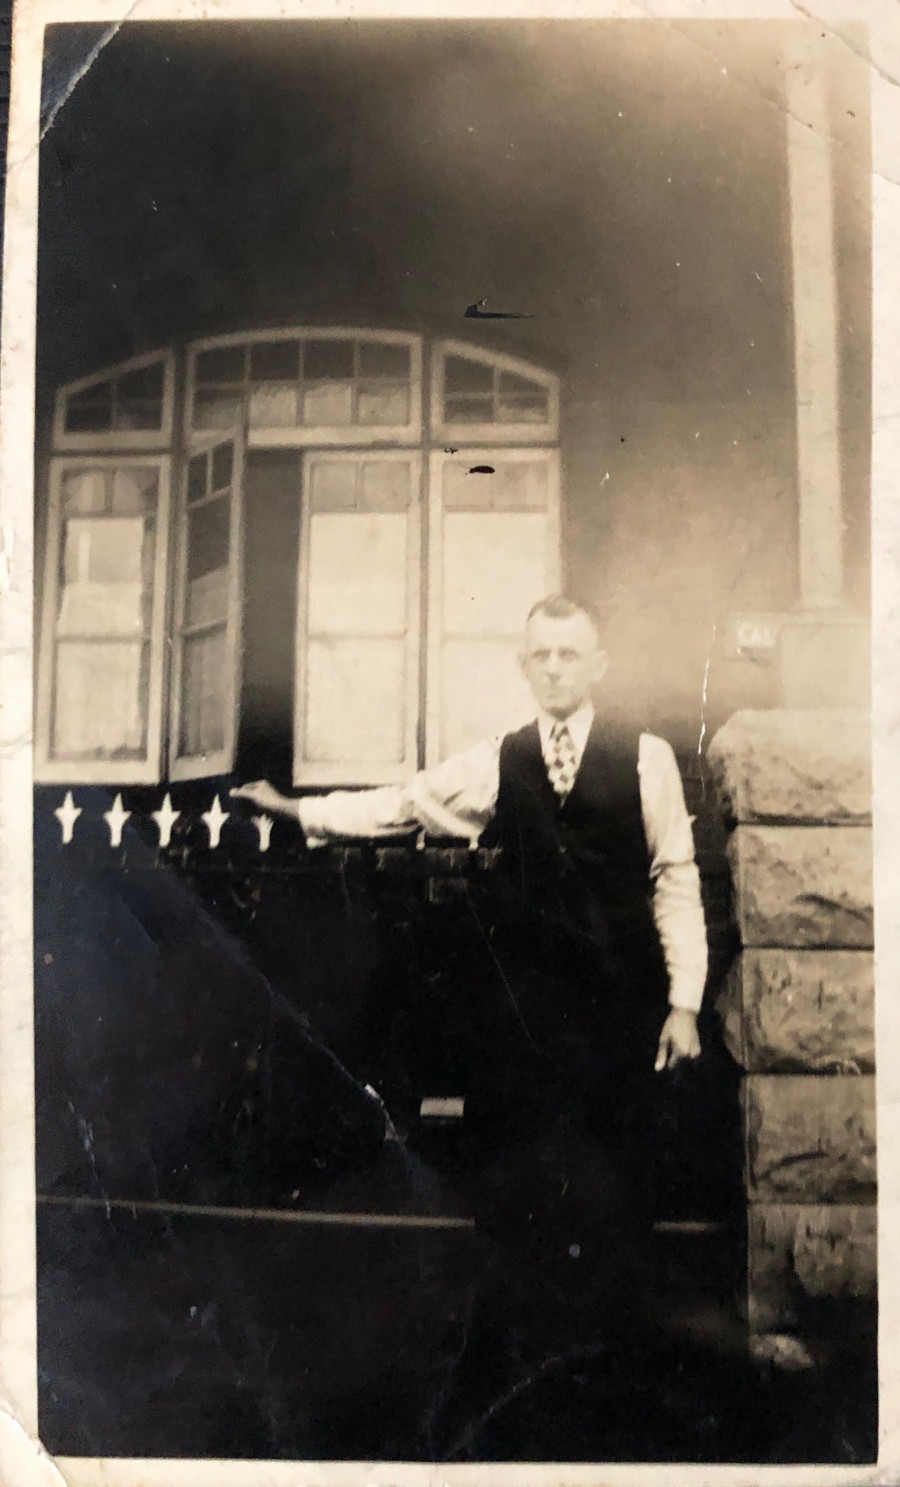 My Father outside the Nobby's Road Residence, Newcastle (about 1925)